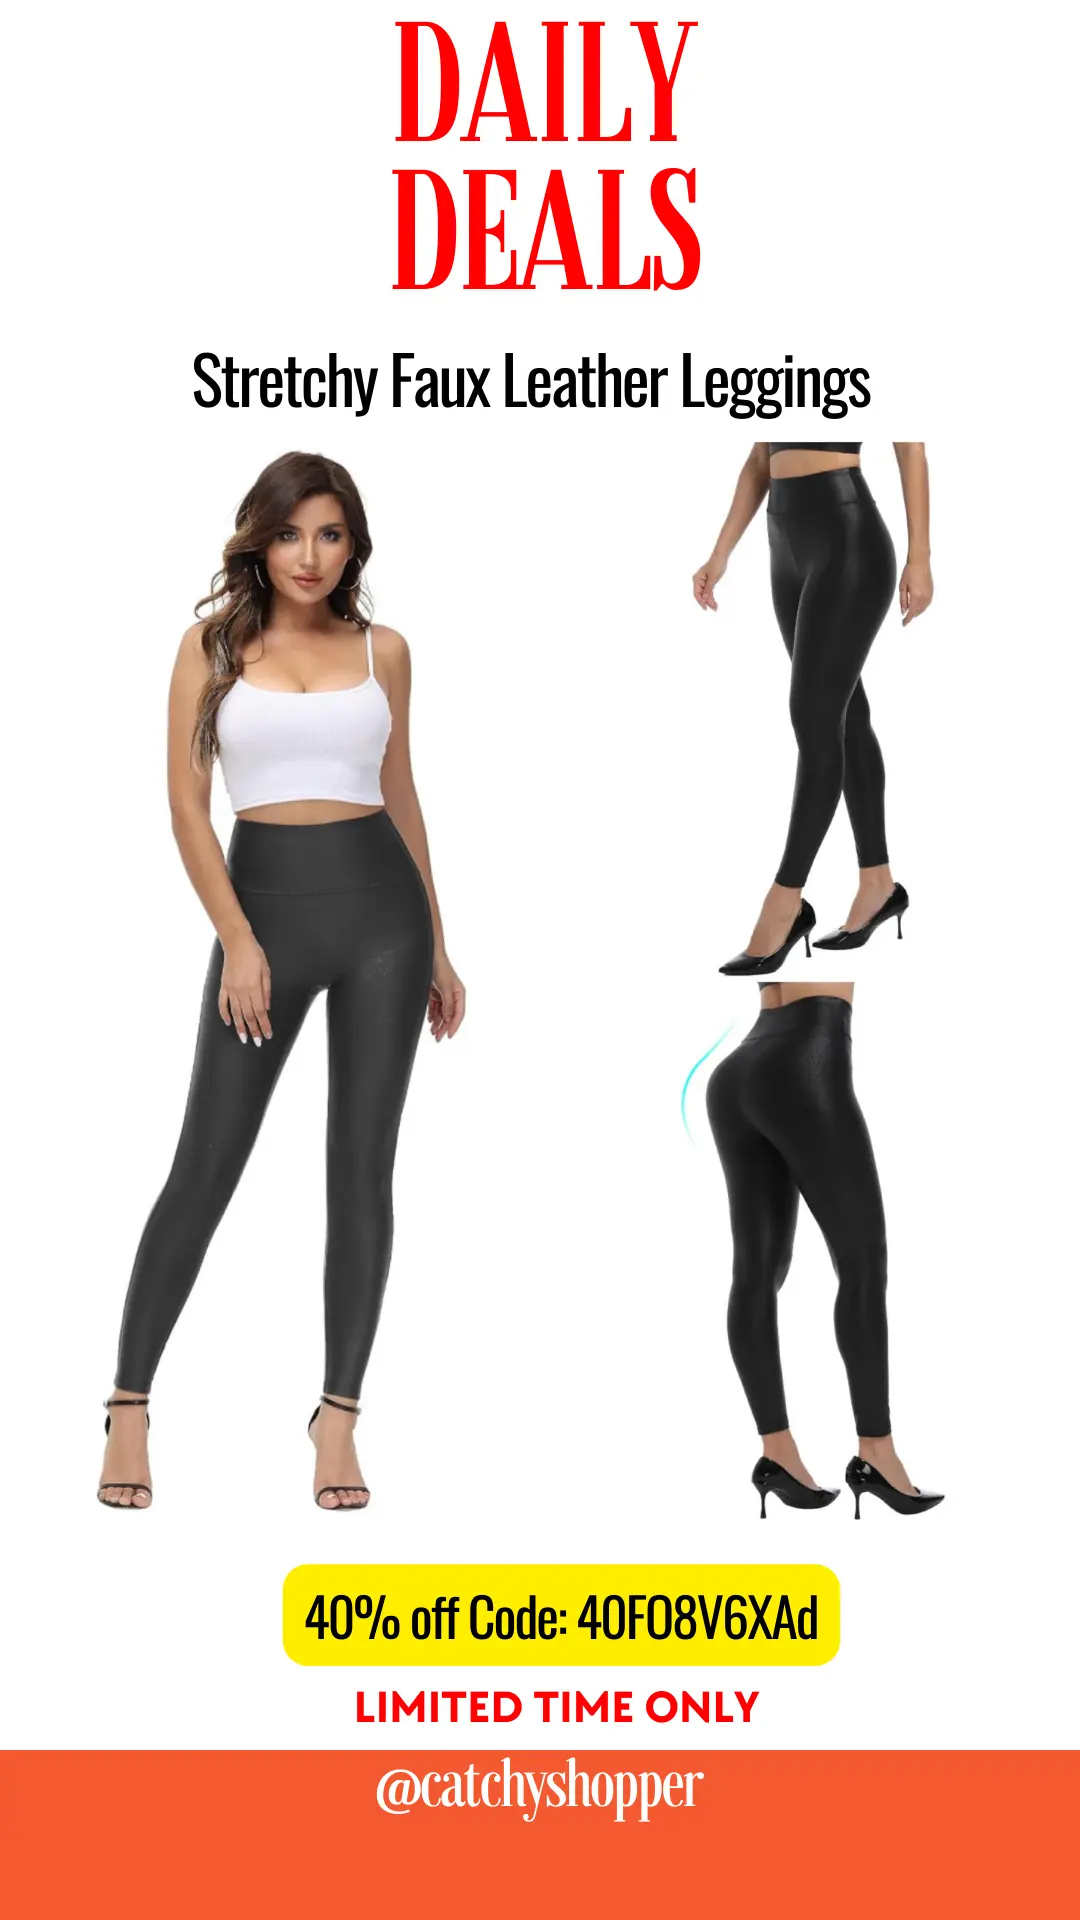 Stretchy Faux Leather Leggings 